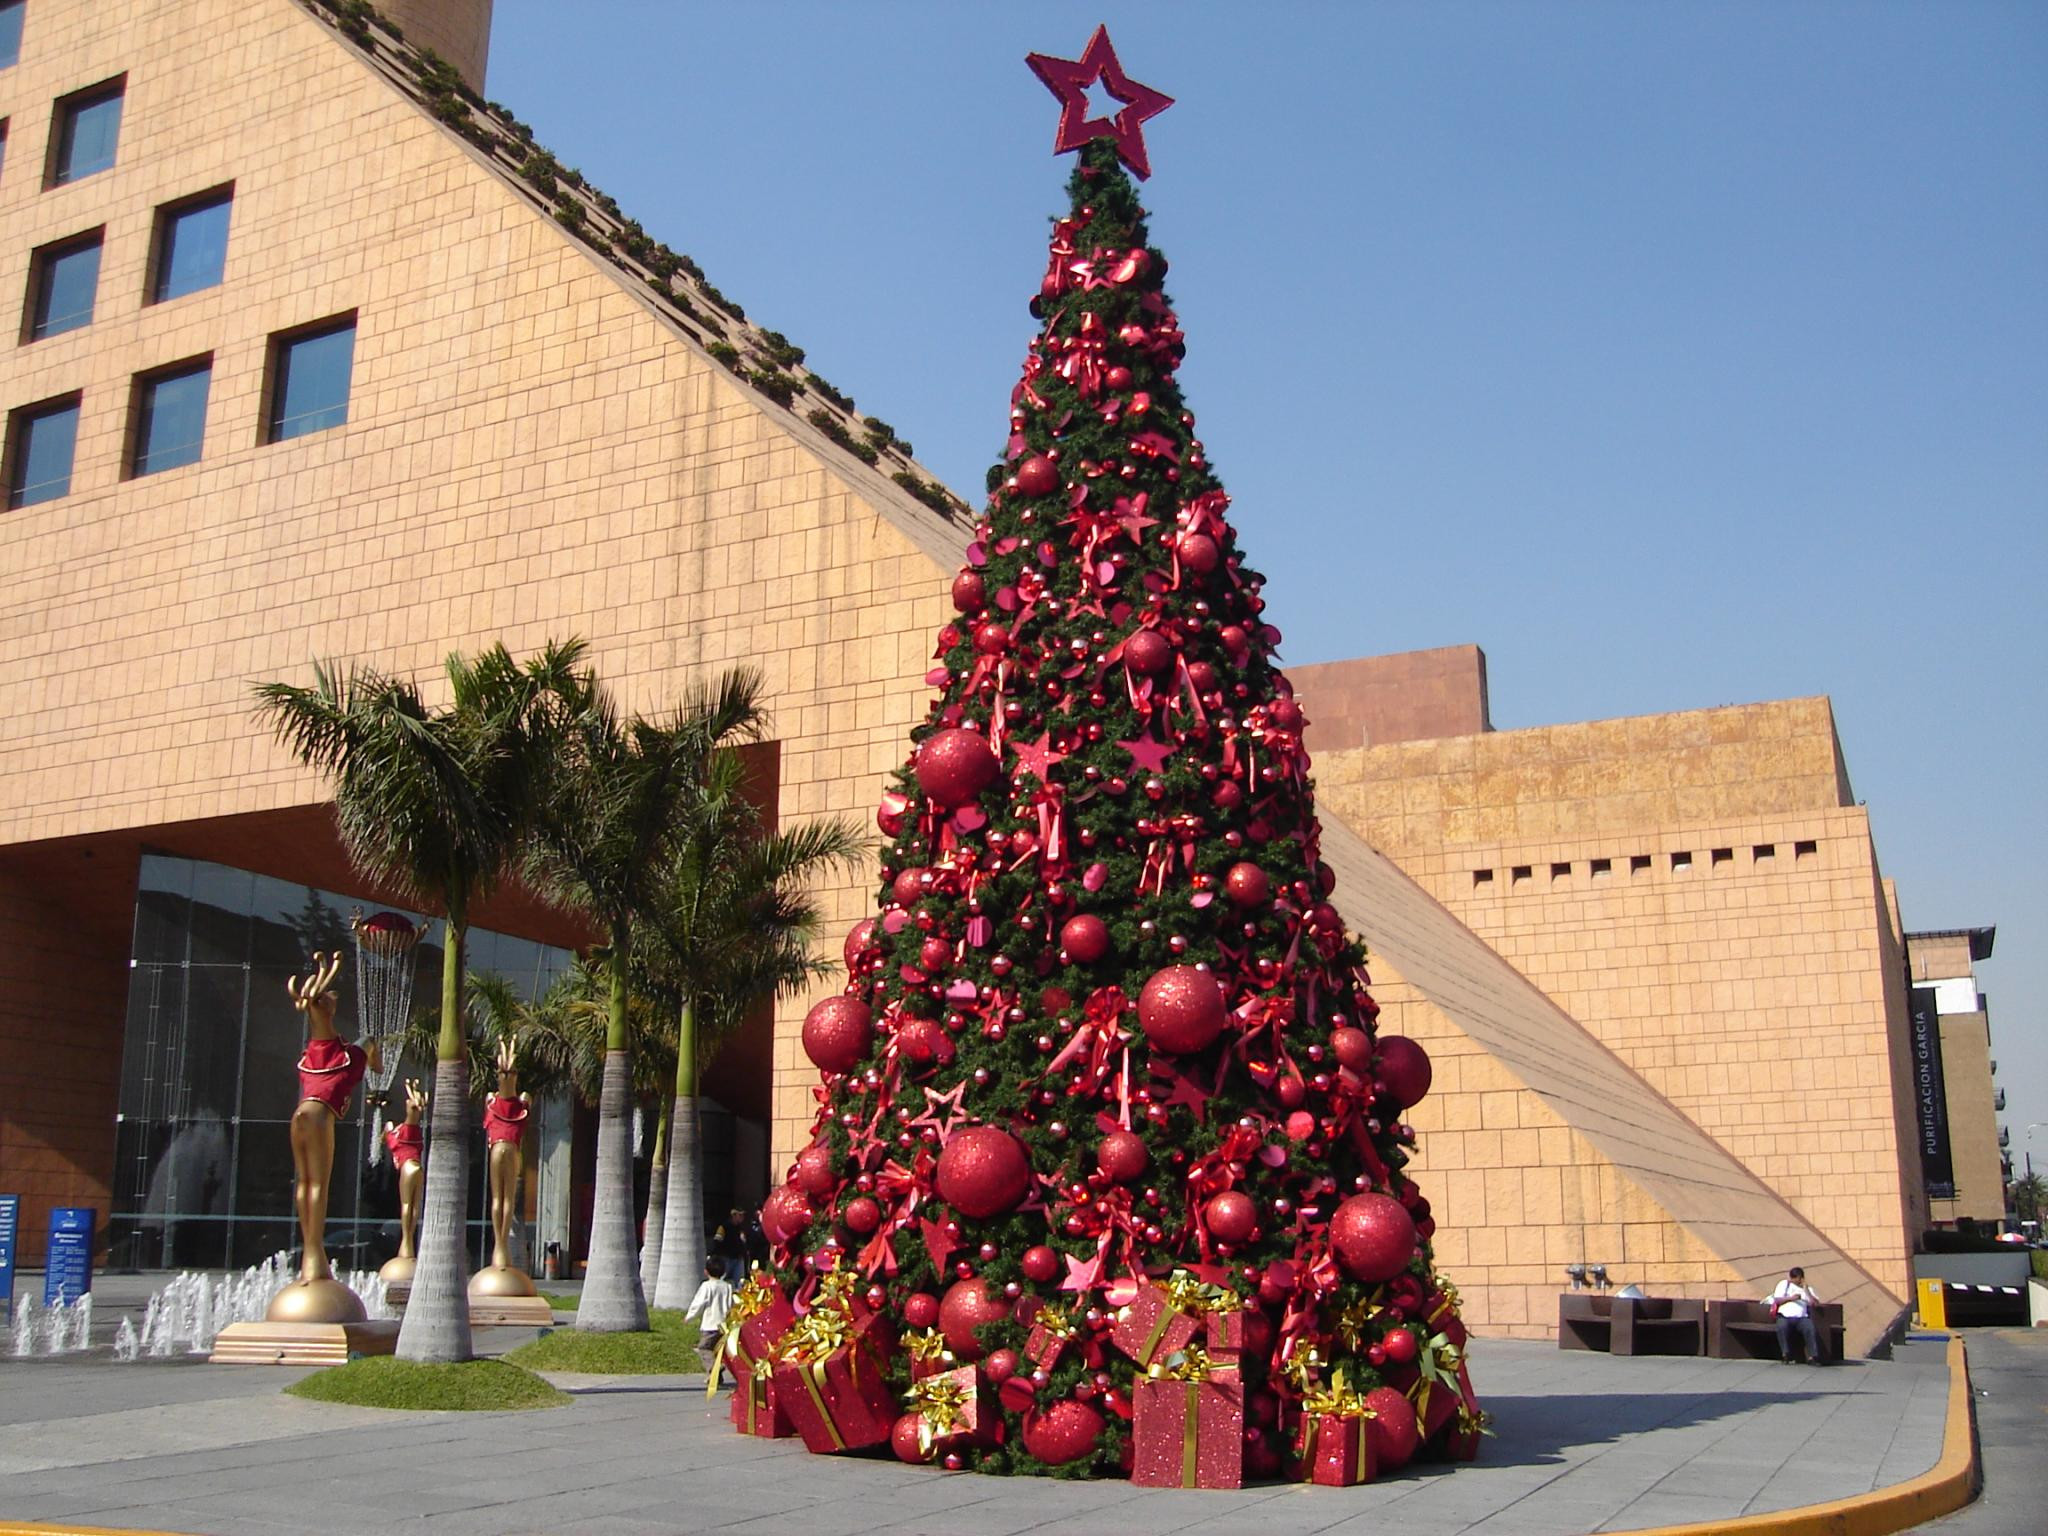 Pool City Christmas Trees
 The 10 Best Boutiques In Mexico City For Christmas Shopping